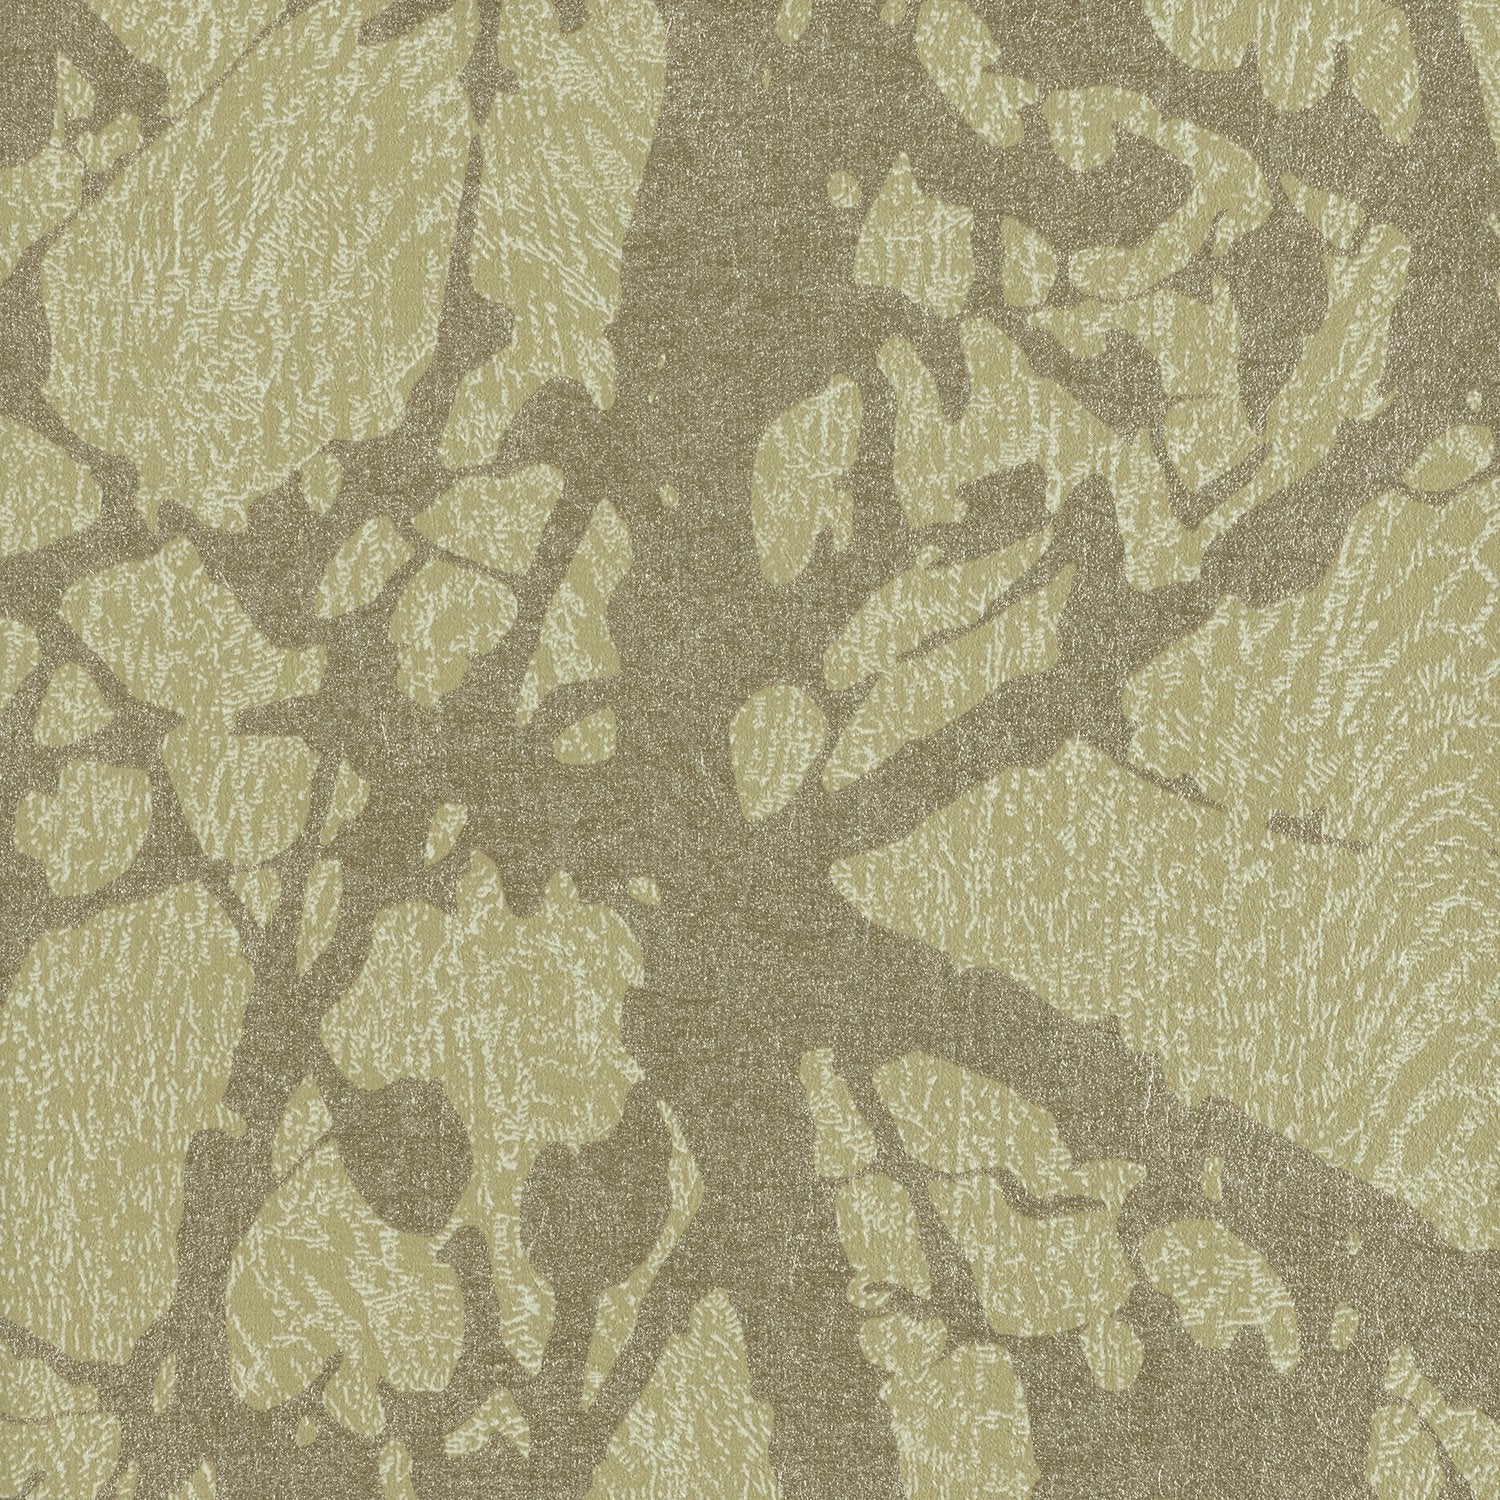 Canopy - Y46842 - Wallcovering - Vycon - Kube Contract